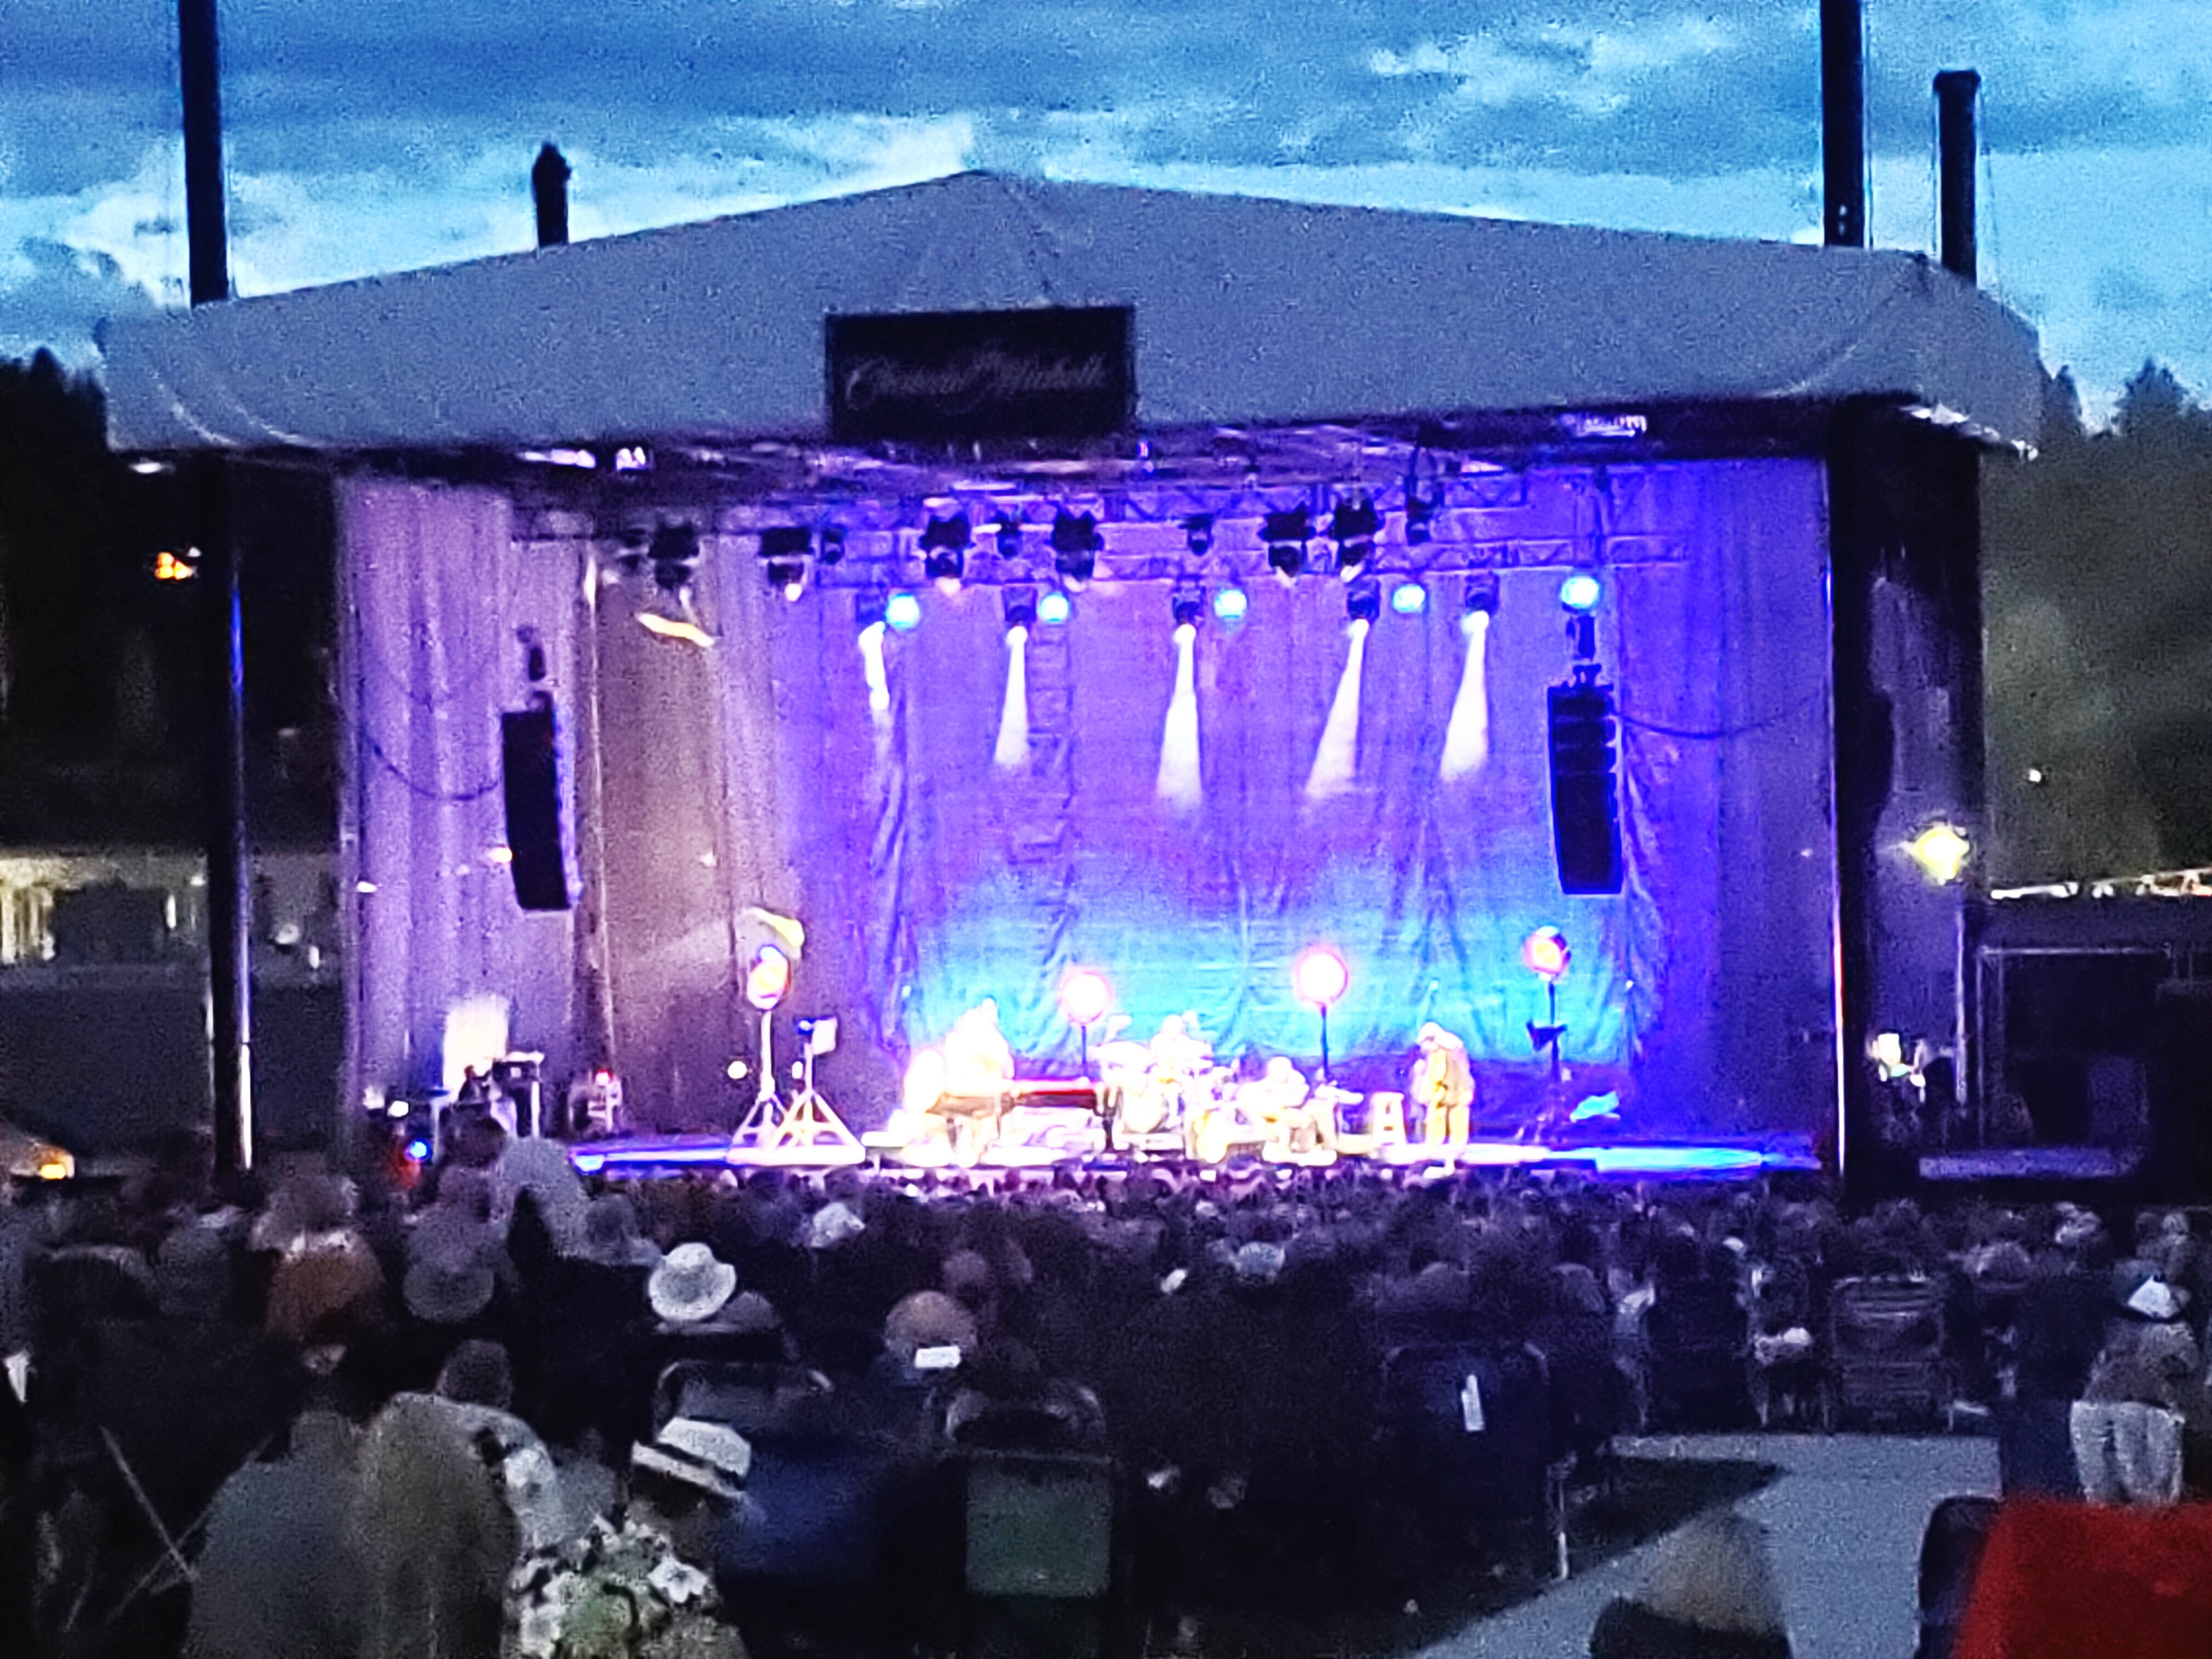 #Rain, #lightning, #picnic & @DianaKrall outdoor #concert w/ @SemiSami at @ChateauSteMichelle. Thought there'd be more vocals & less instrumentals. Funny when she said, 